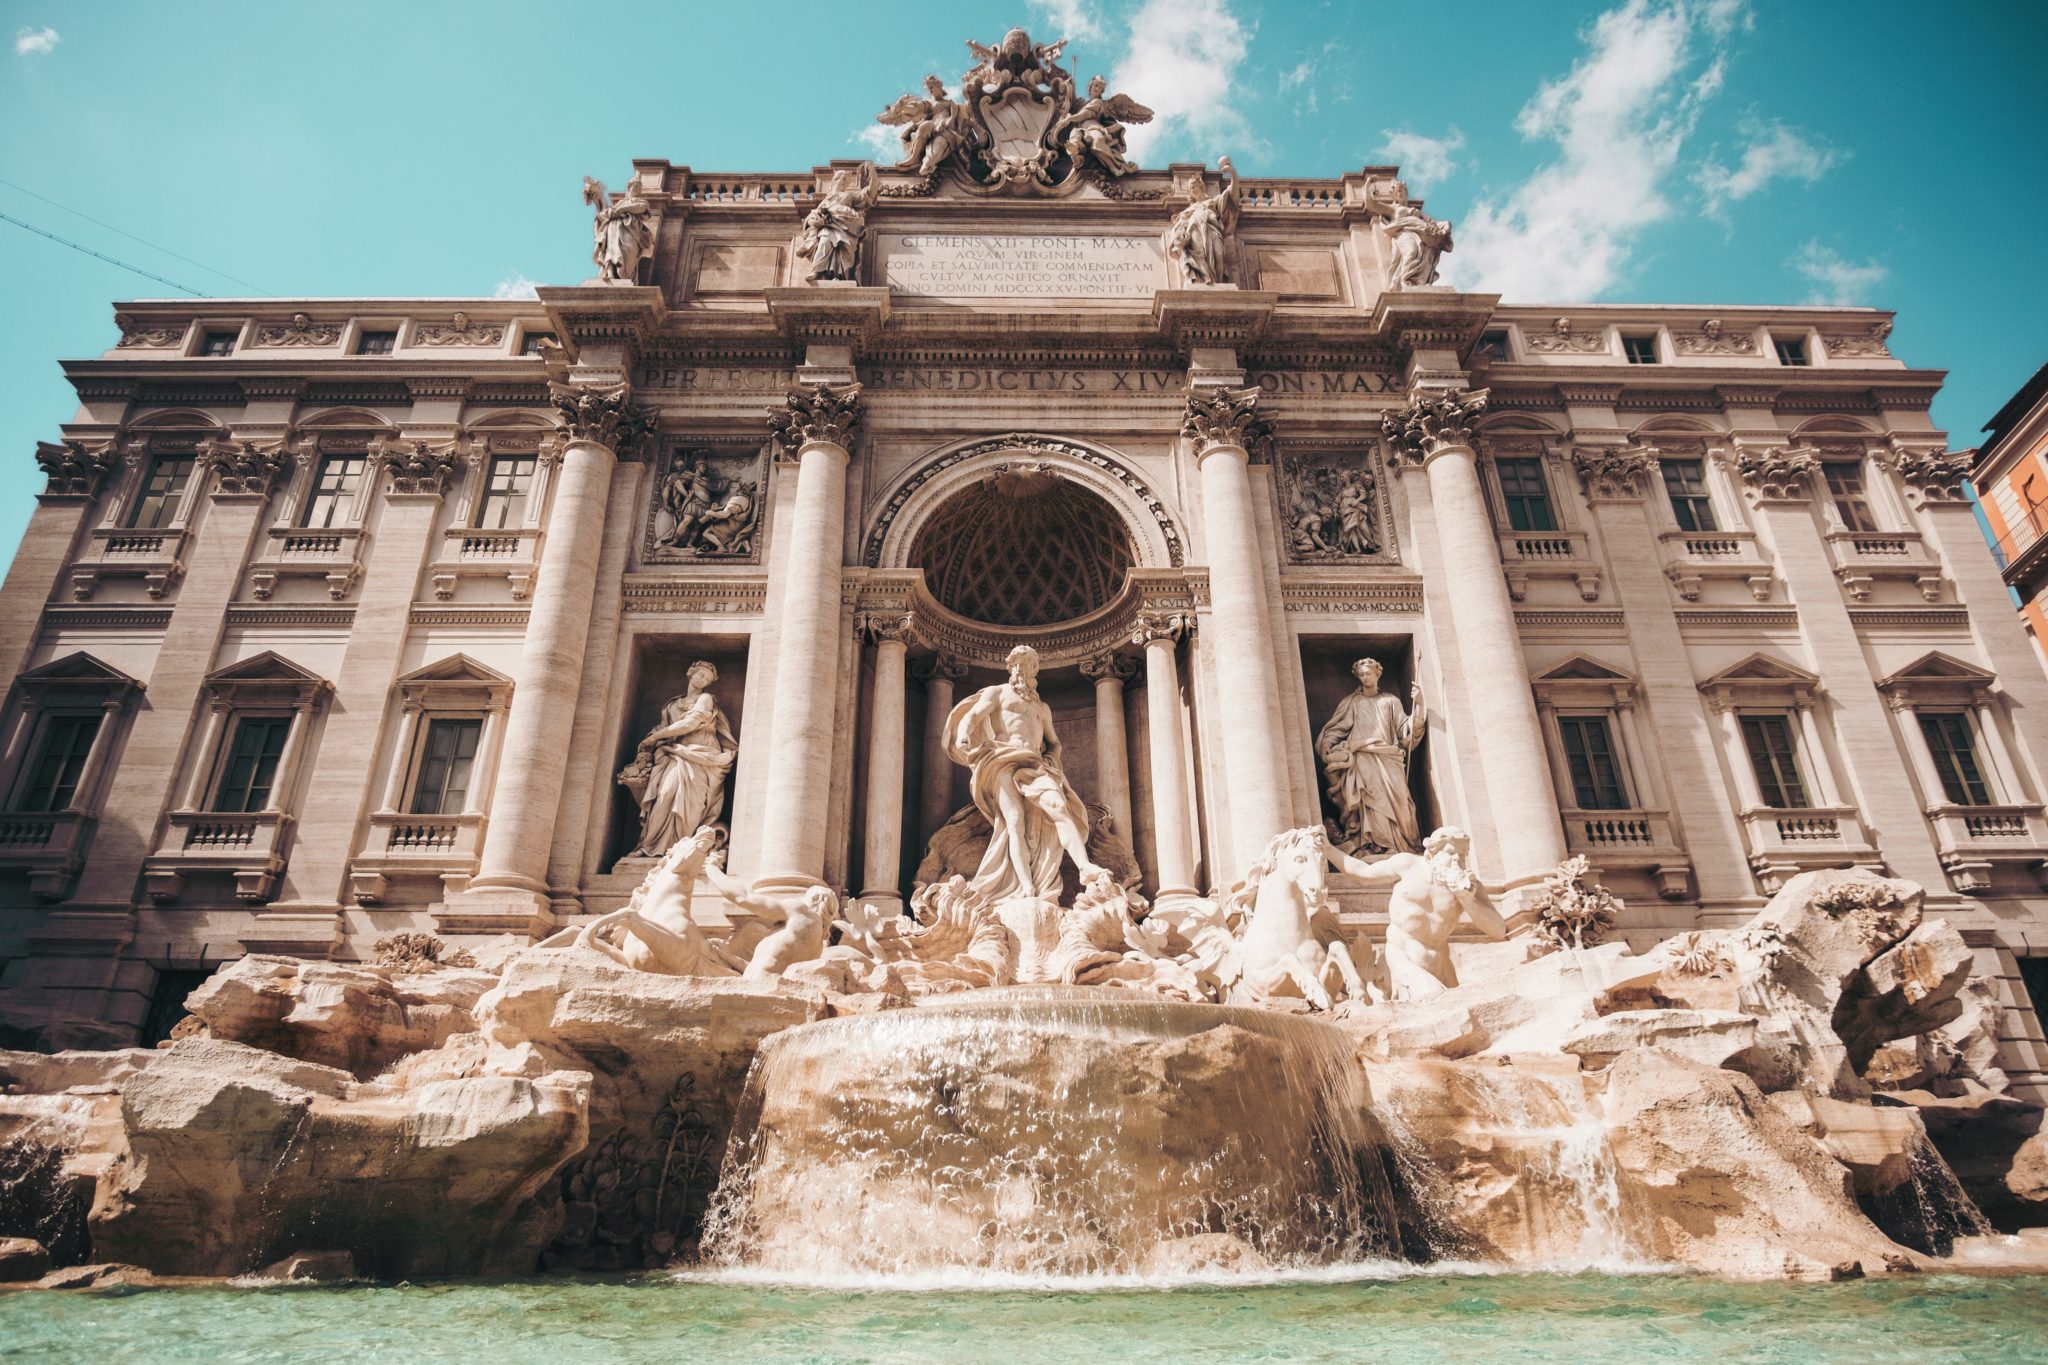 The Trevi Fountain, an absolute MUST if you're going to Rome. Here are my top 10 places to visit in the city | Italy travel guide | Fontana di trevi | Travel bloggers guide to rome | GoodtomiCha